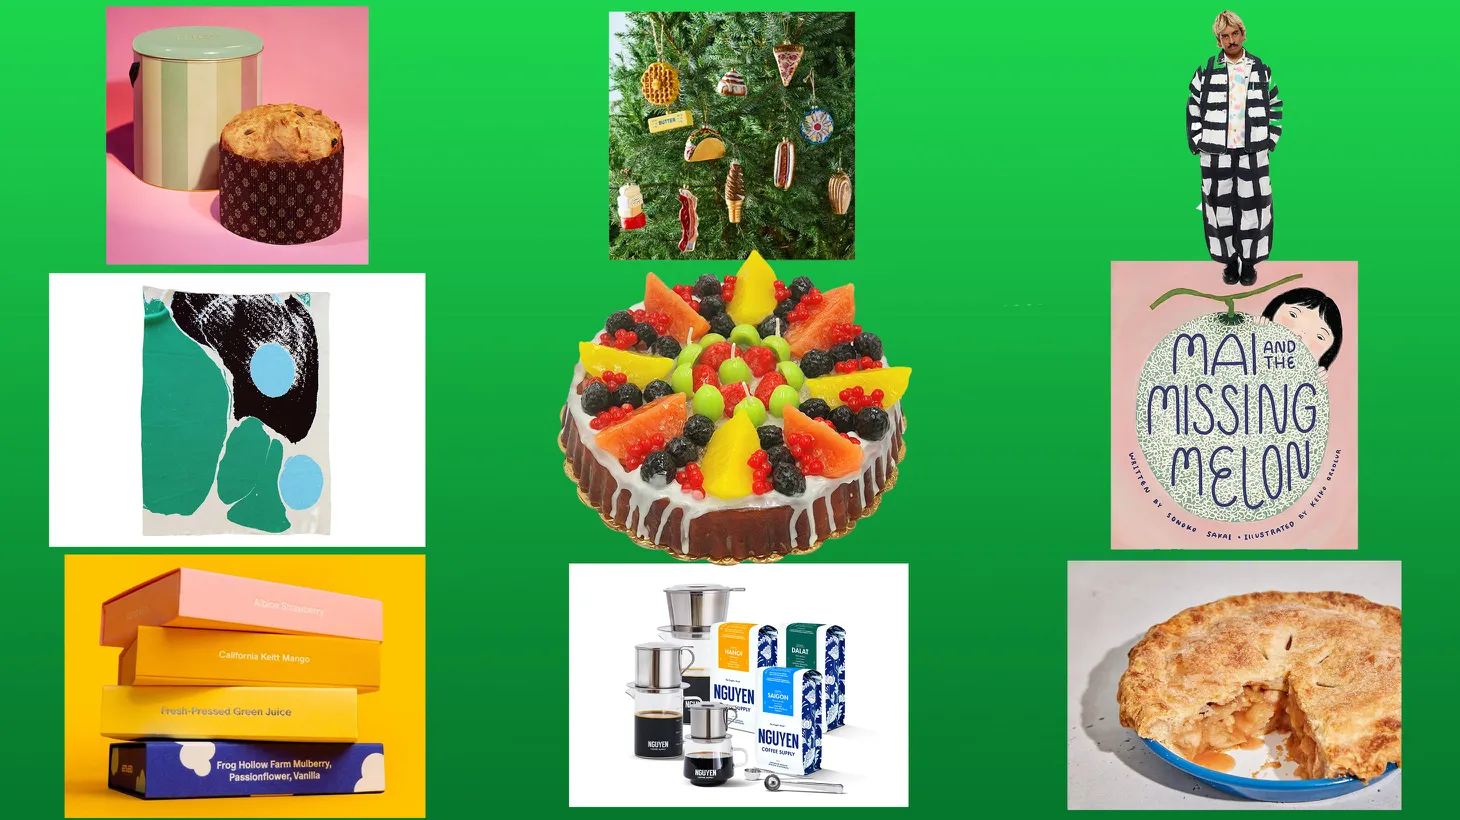 What's your favorite item on Good Food's Gift guide?